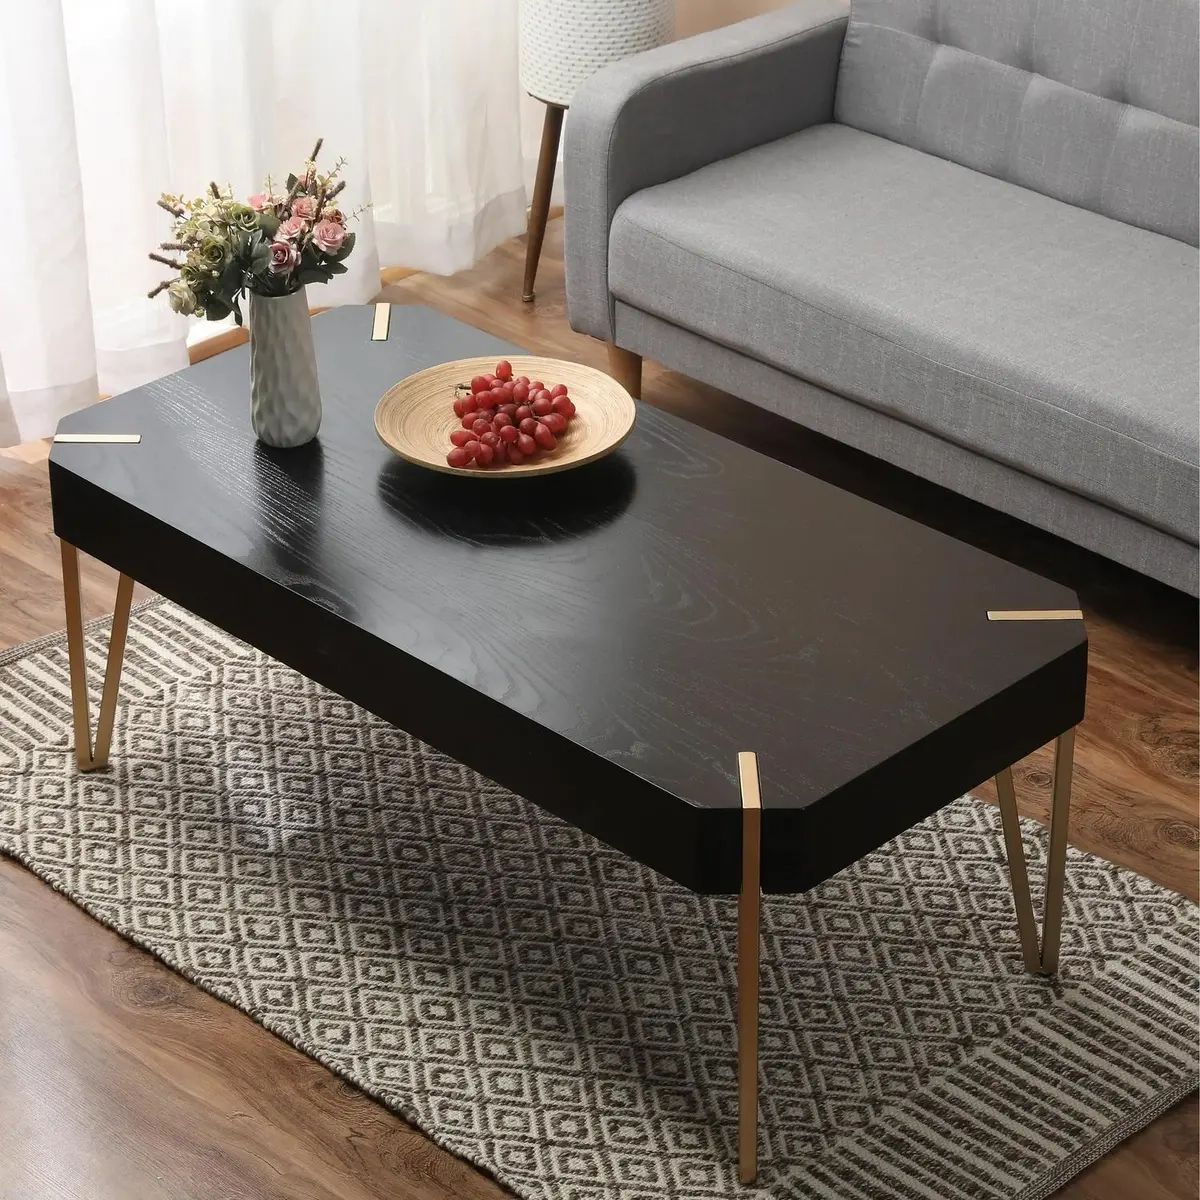 Rectangular Black Wooden Coffee Table W/Gold Hairpin Metal Legs, Matte  Finish | Ebay Inside Coffee Tables With Metal Legs (Photo 14 of 15)